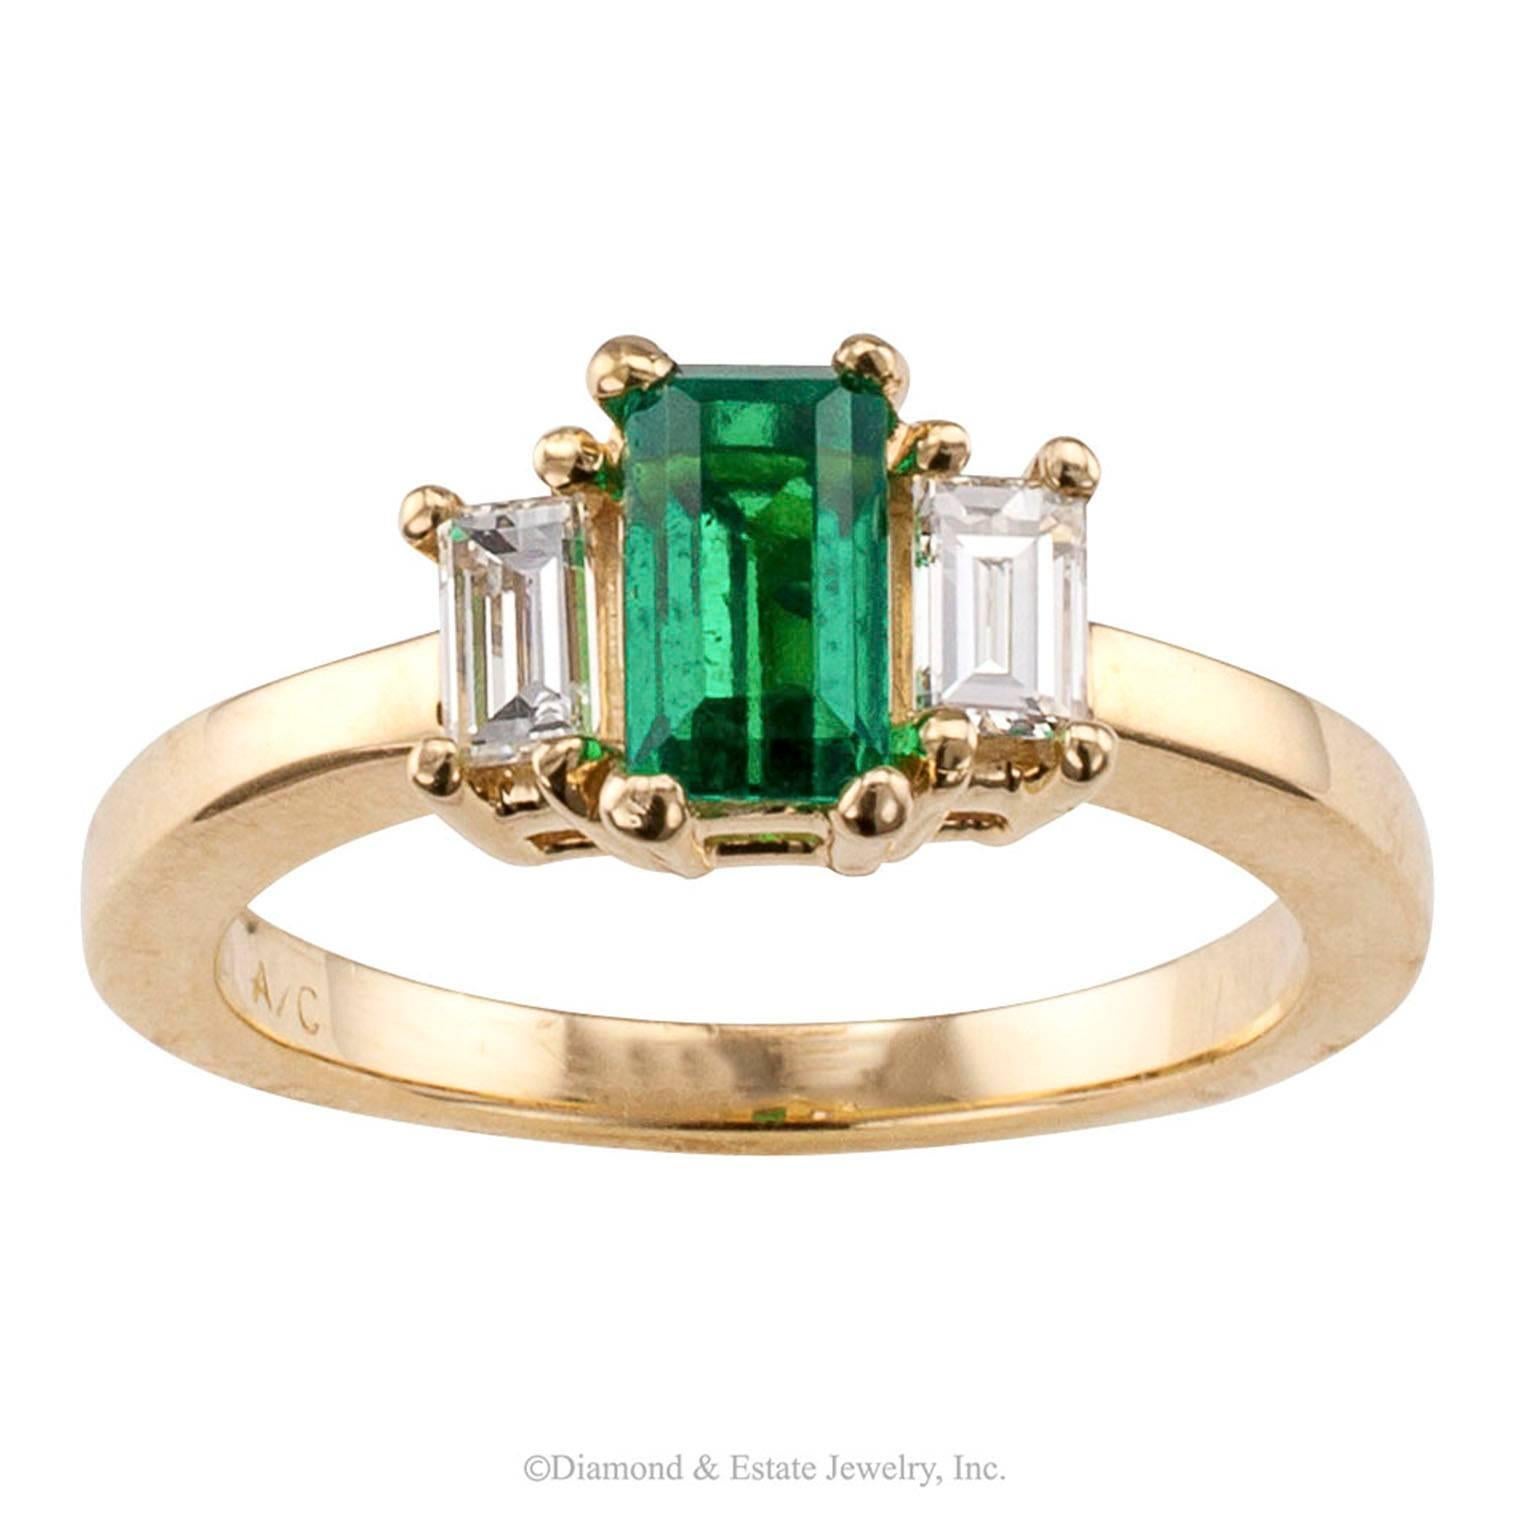 Emerald-cut Emerald Diamond Ring

Emerald-cut emerald and diamond ring mounted in 14-karat yellow gold circa 1990.  Dainty and demure, but OH so pretty!  The 0.81 carat emerald-cut emerald accompanied by a report from American Gem Laboratories